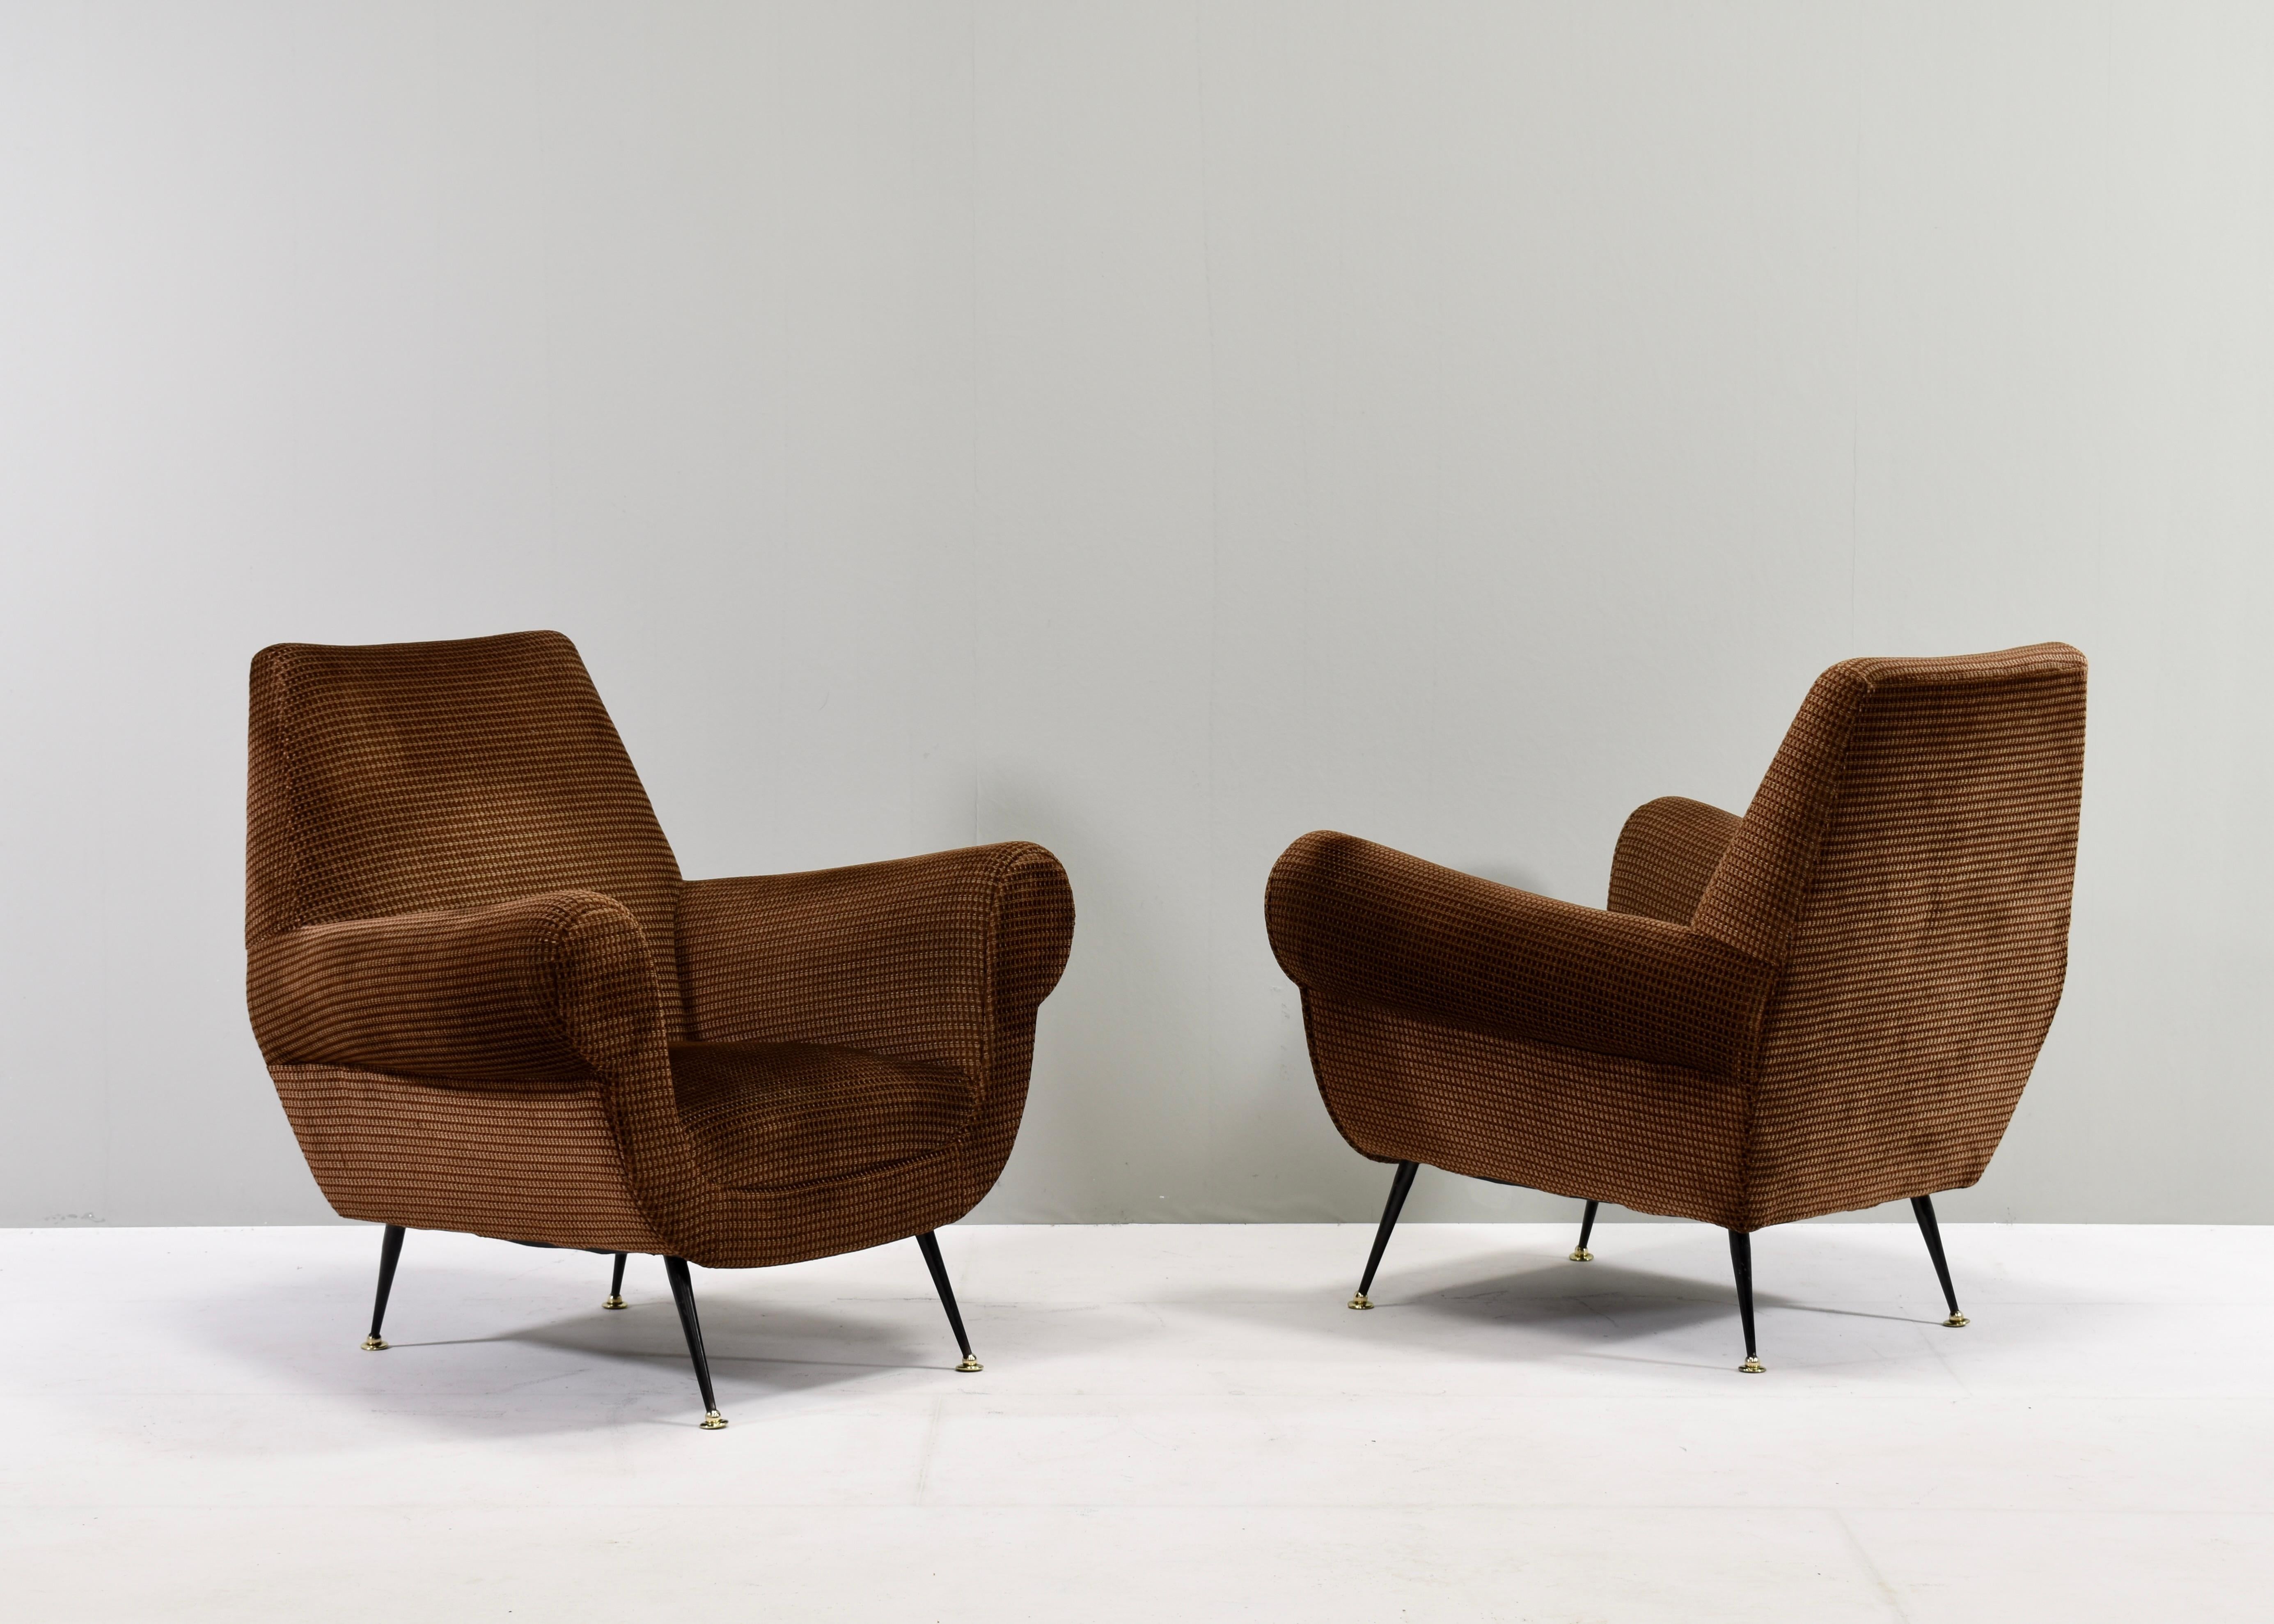 Elegant pair of club lounge chairs by Gigi Radice for Minotti. The chairs still have their original mohair velvet fabric from the 1950’s and are in very good condition with minor signs of age and use. The colour varies from a deep chocolate to a